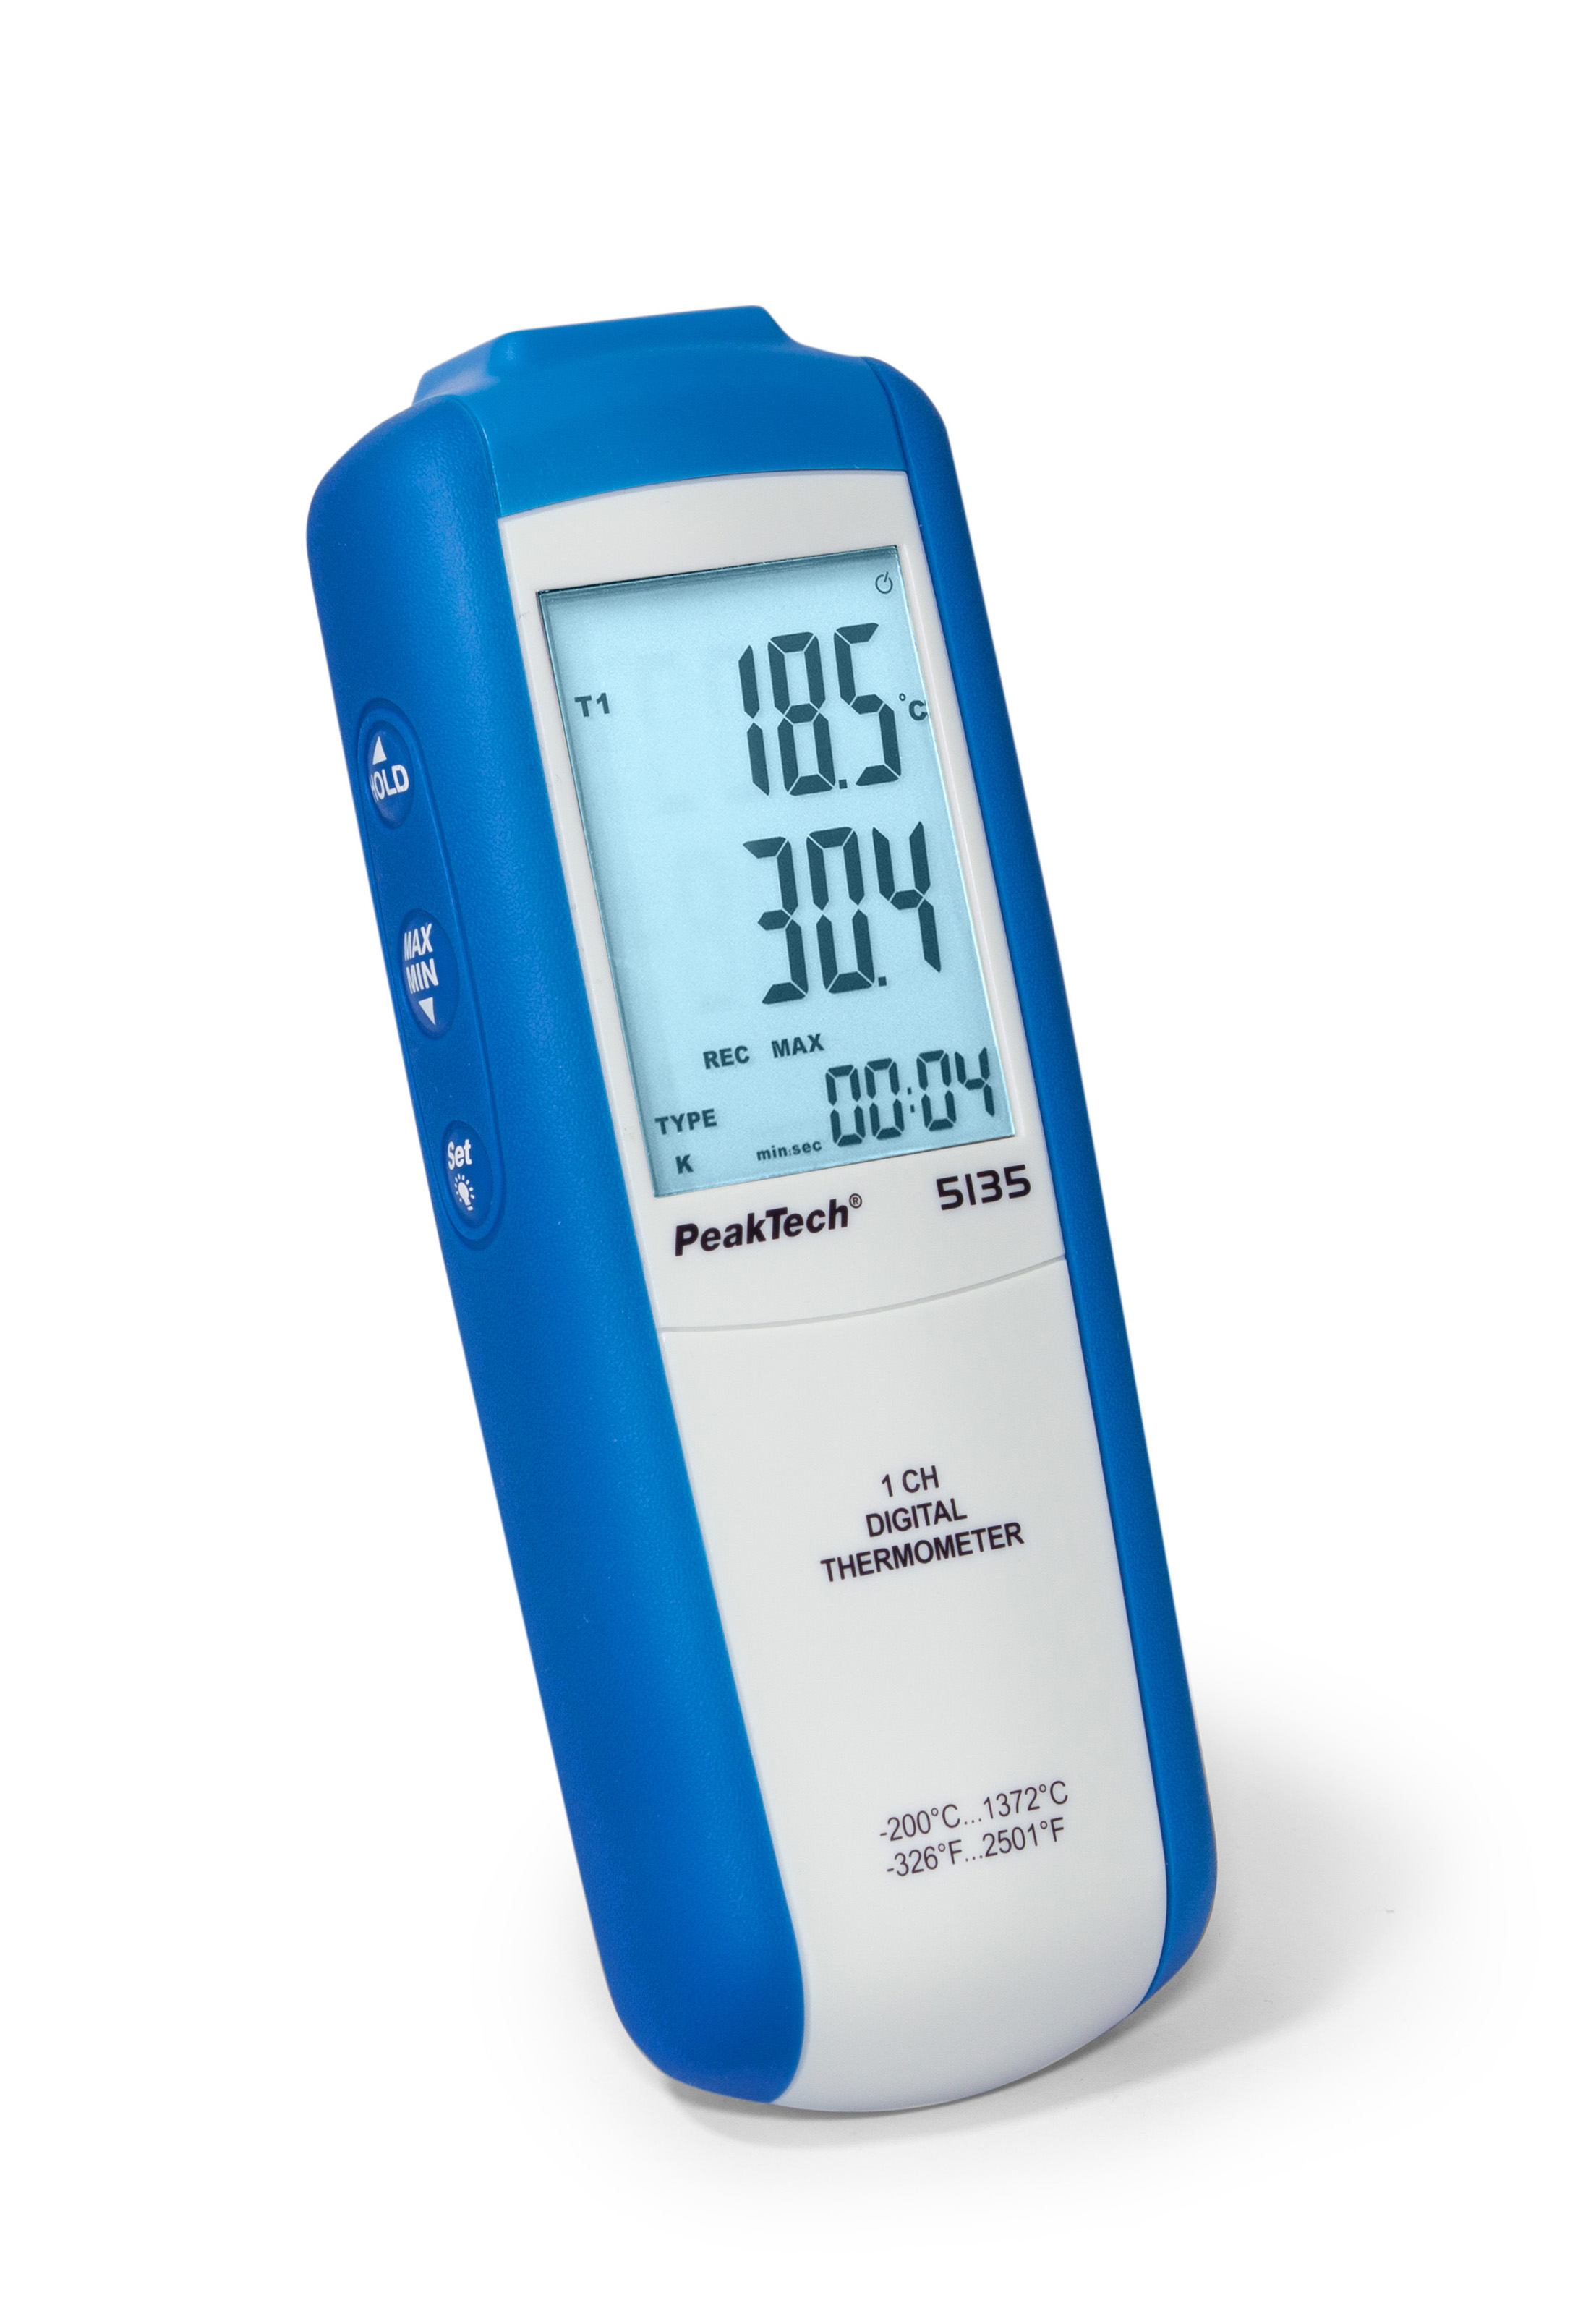 «PeakTech® P 5135» Digital-Thermometer 1 CH, -200...+1372°C